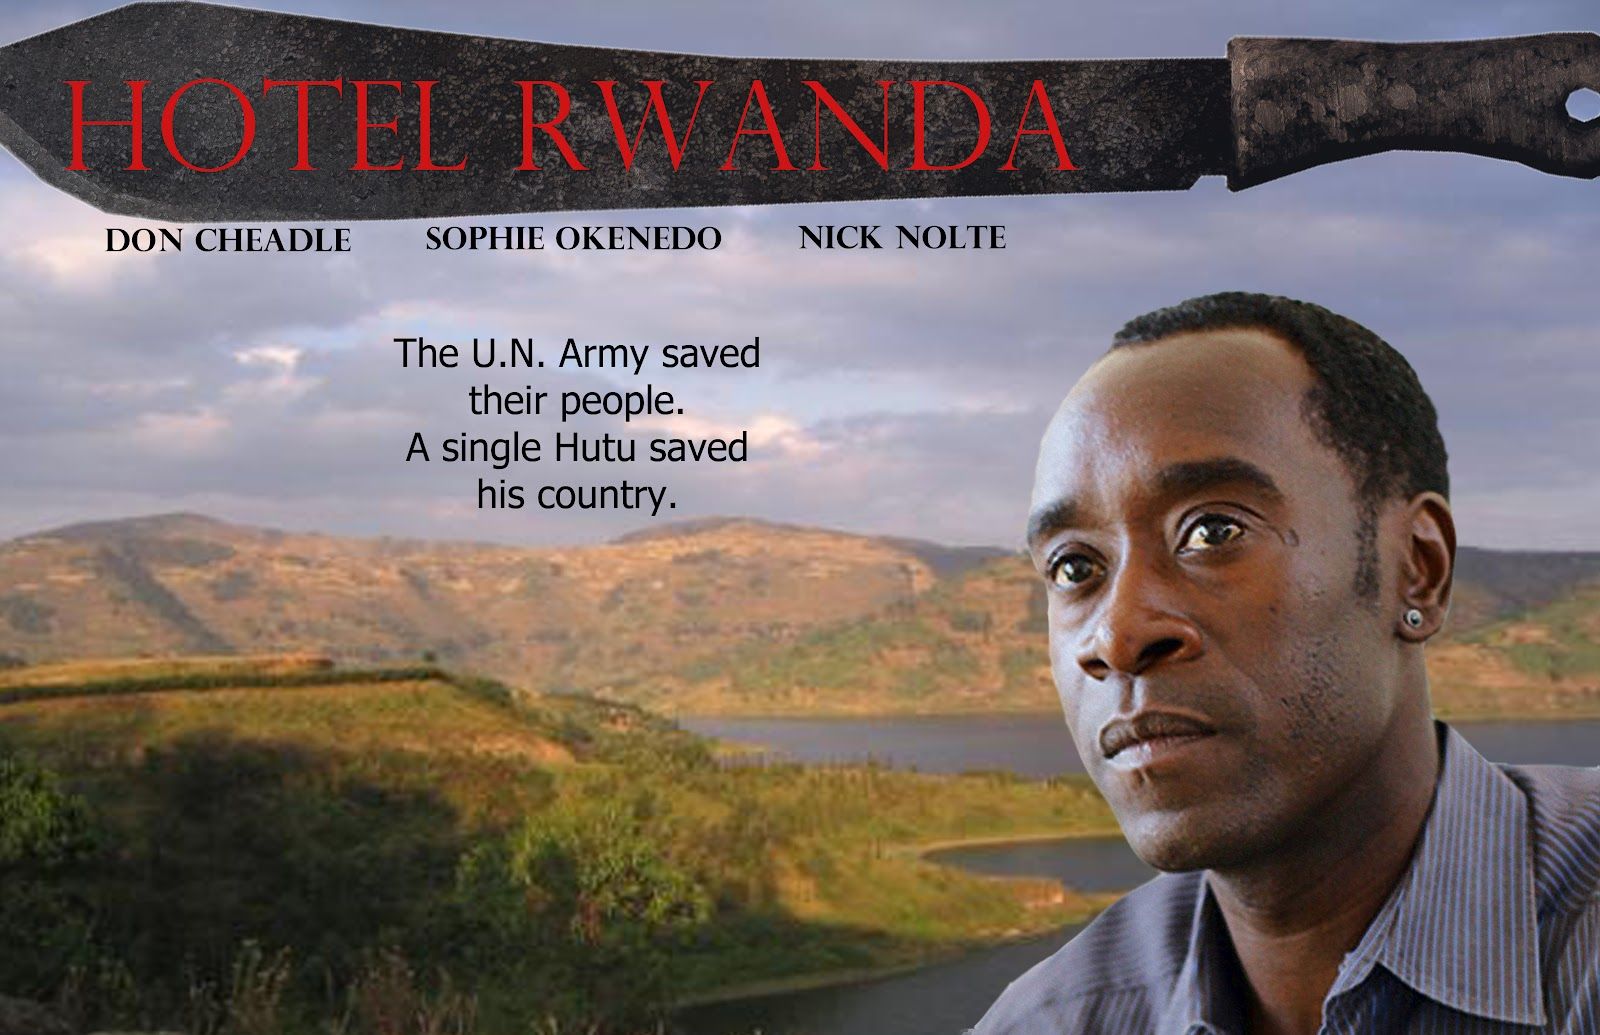 Hotel Rwanda Movie Review Rwanda Image, Picture, Photo, Icon and Wallpaper: Ravepad place to rave about anything and everything!